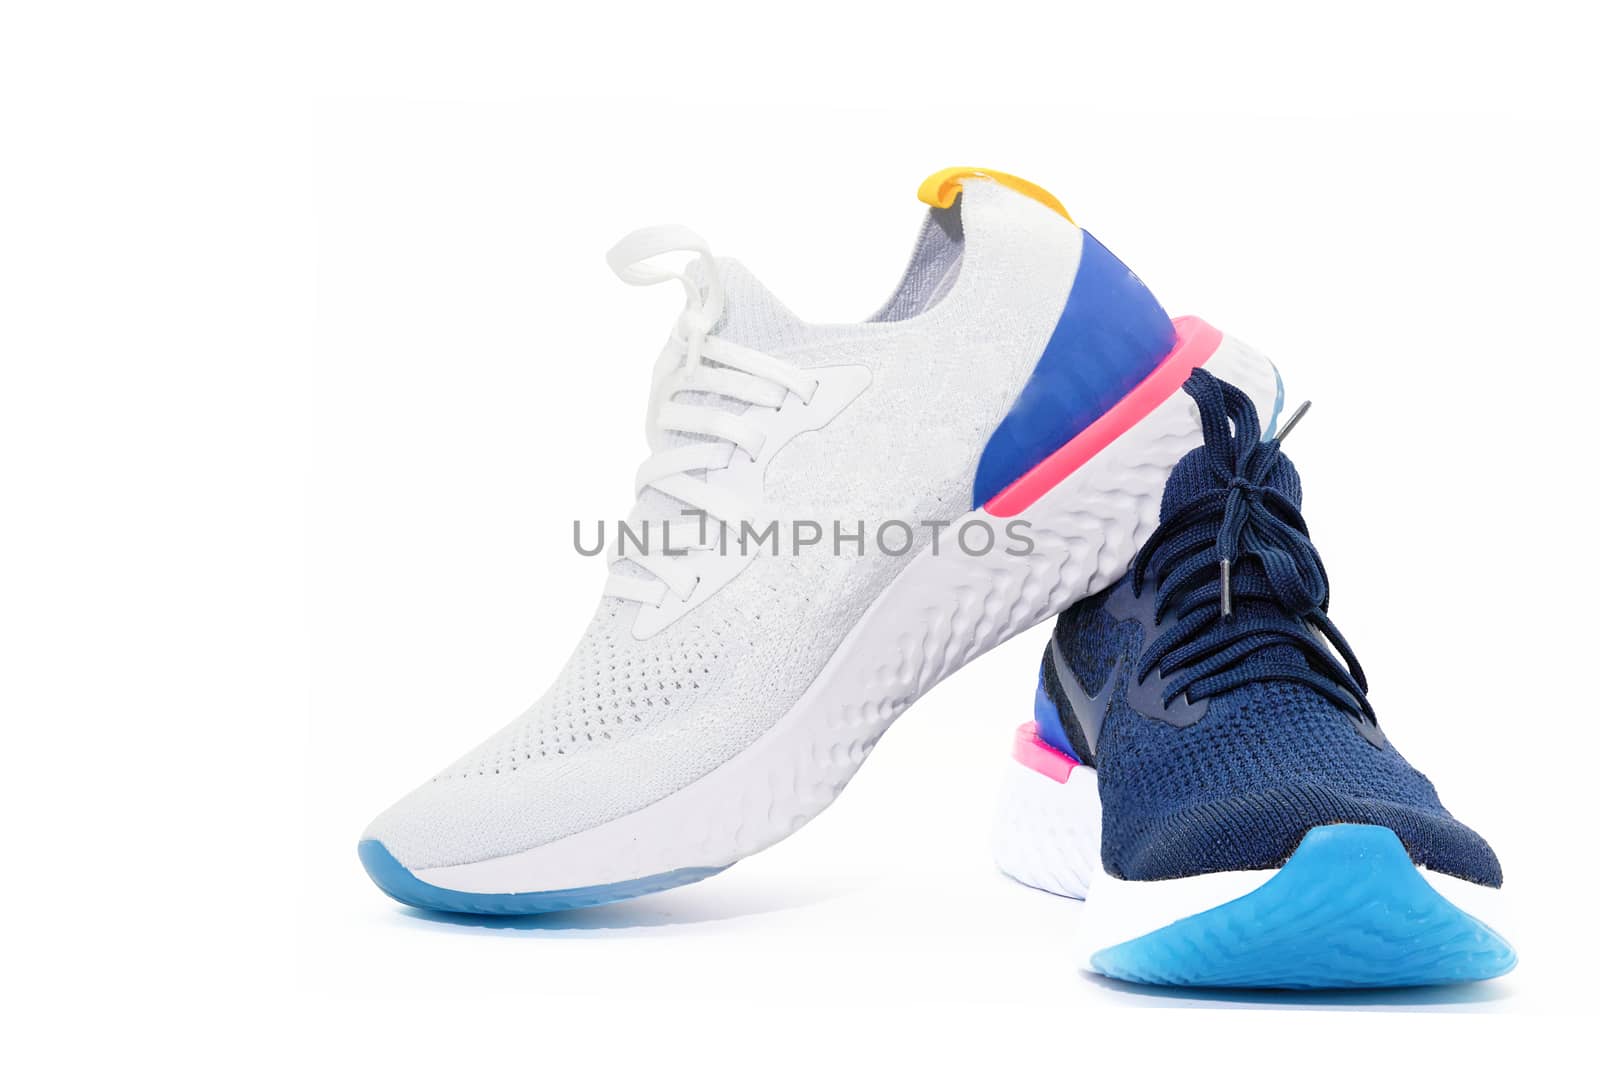 sport shoes for running ,two colors on isolated white background